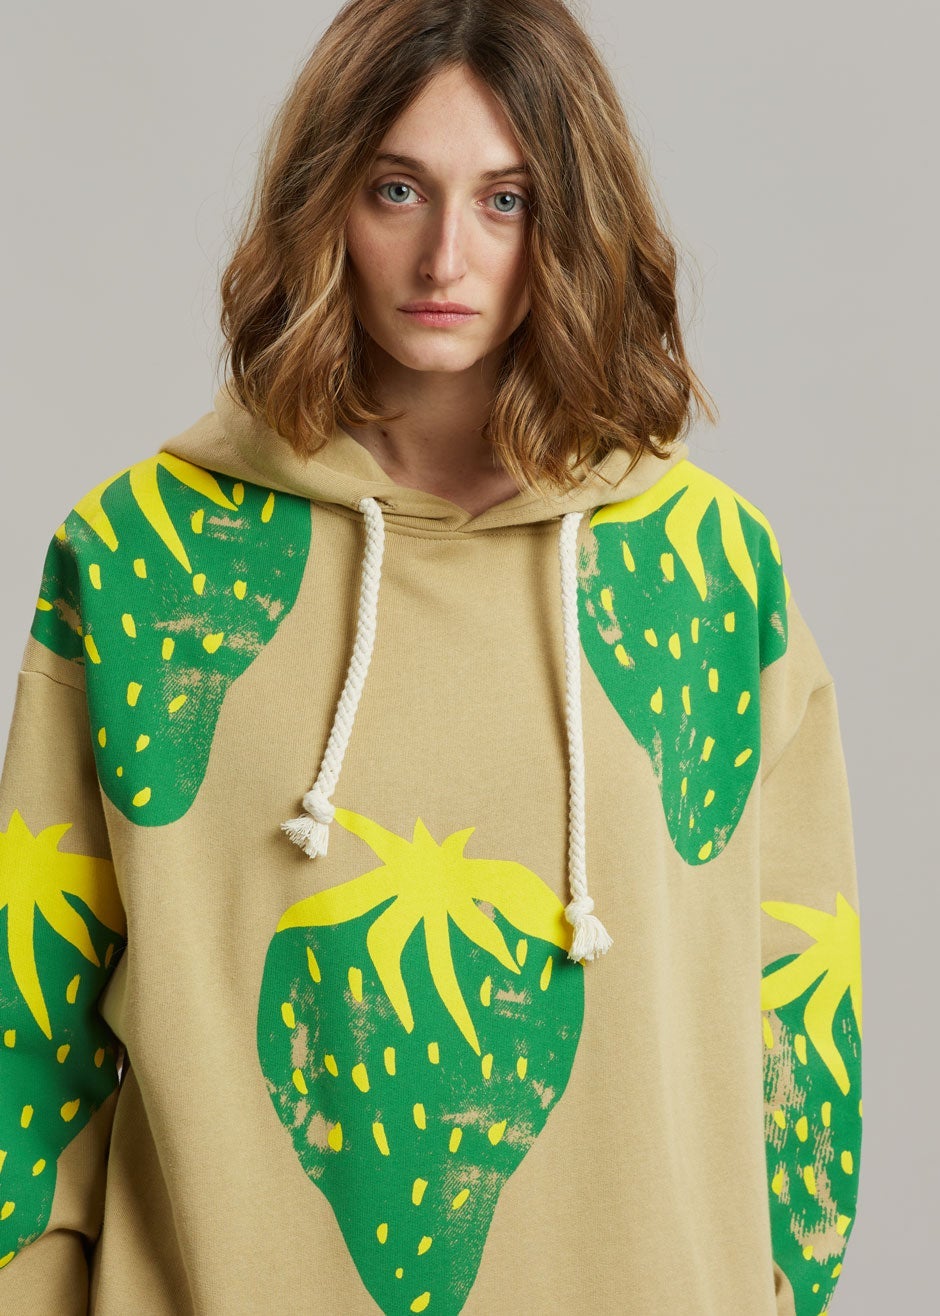 JW Anderson Strawberry Hoodie - Natural/Green - 4